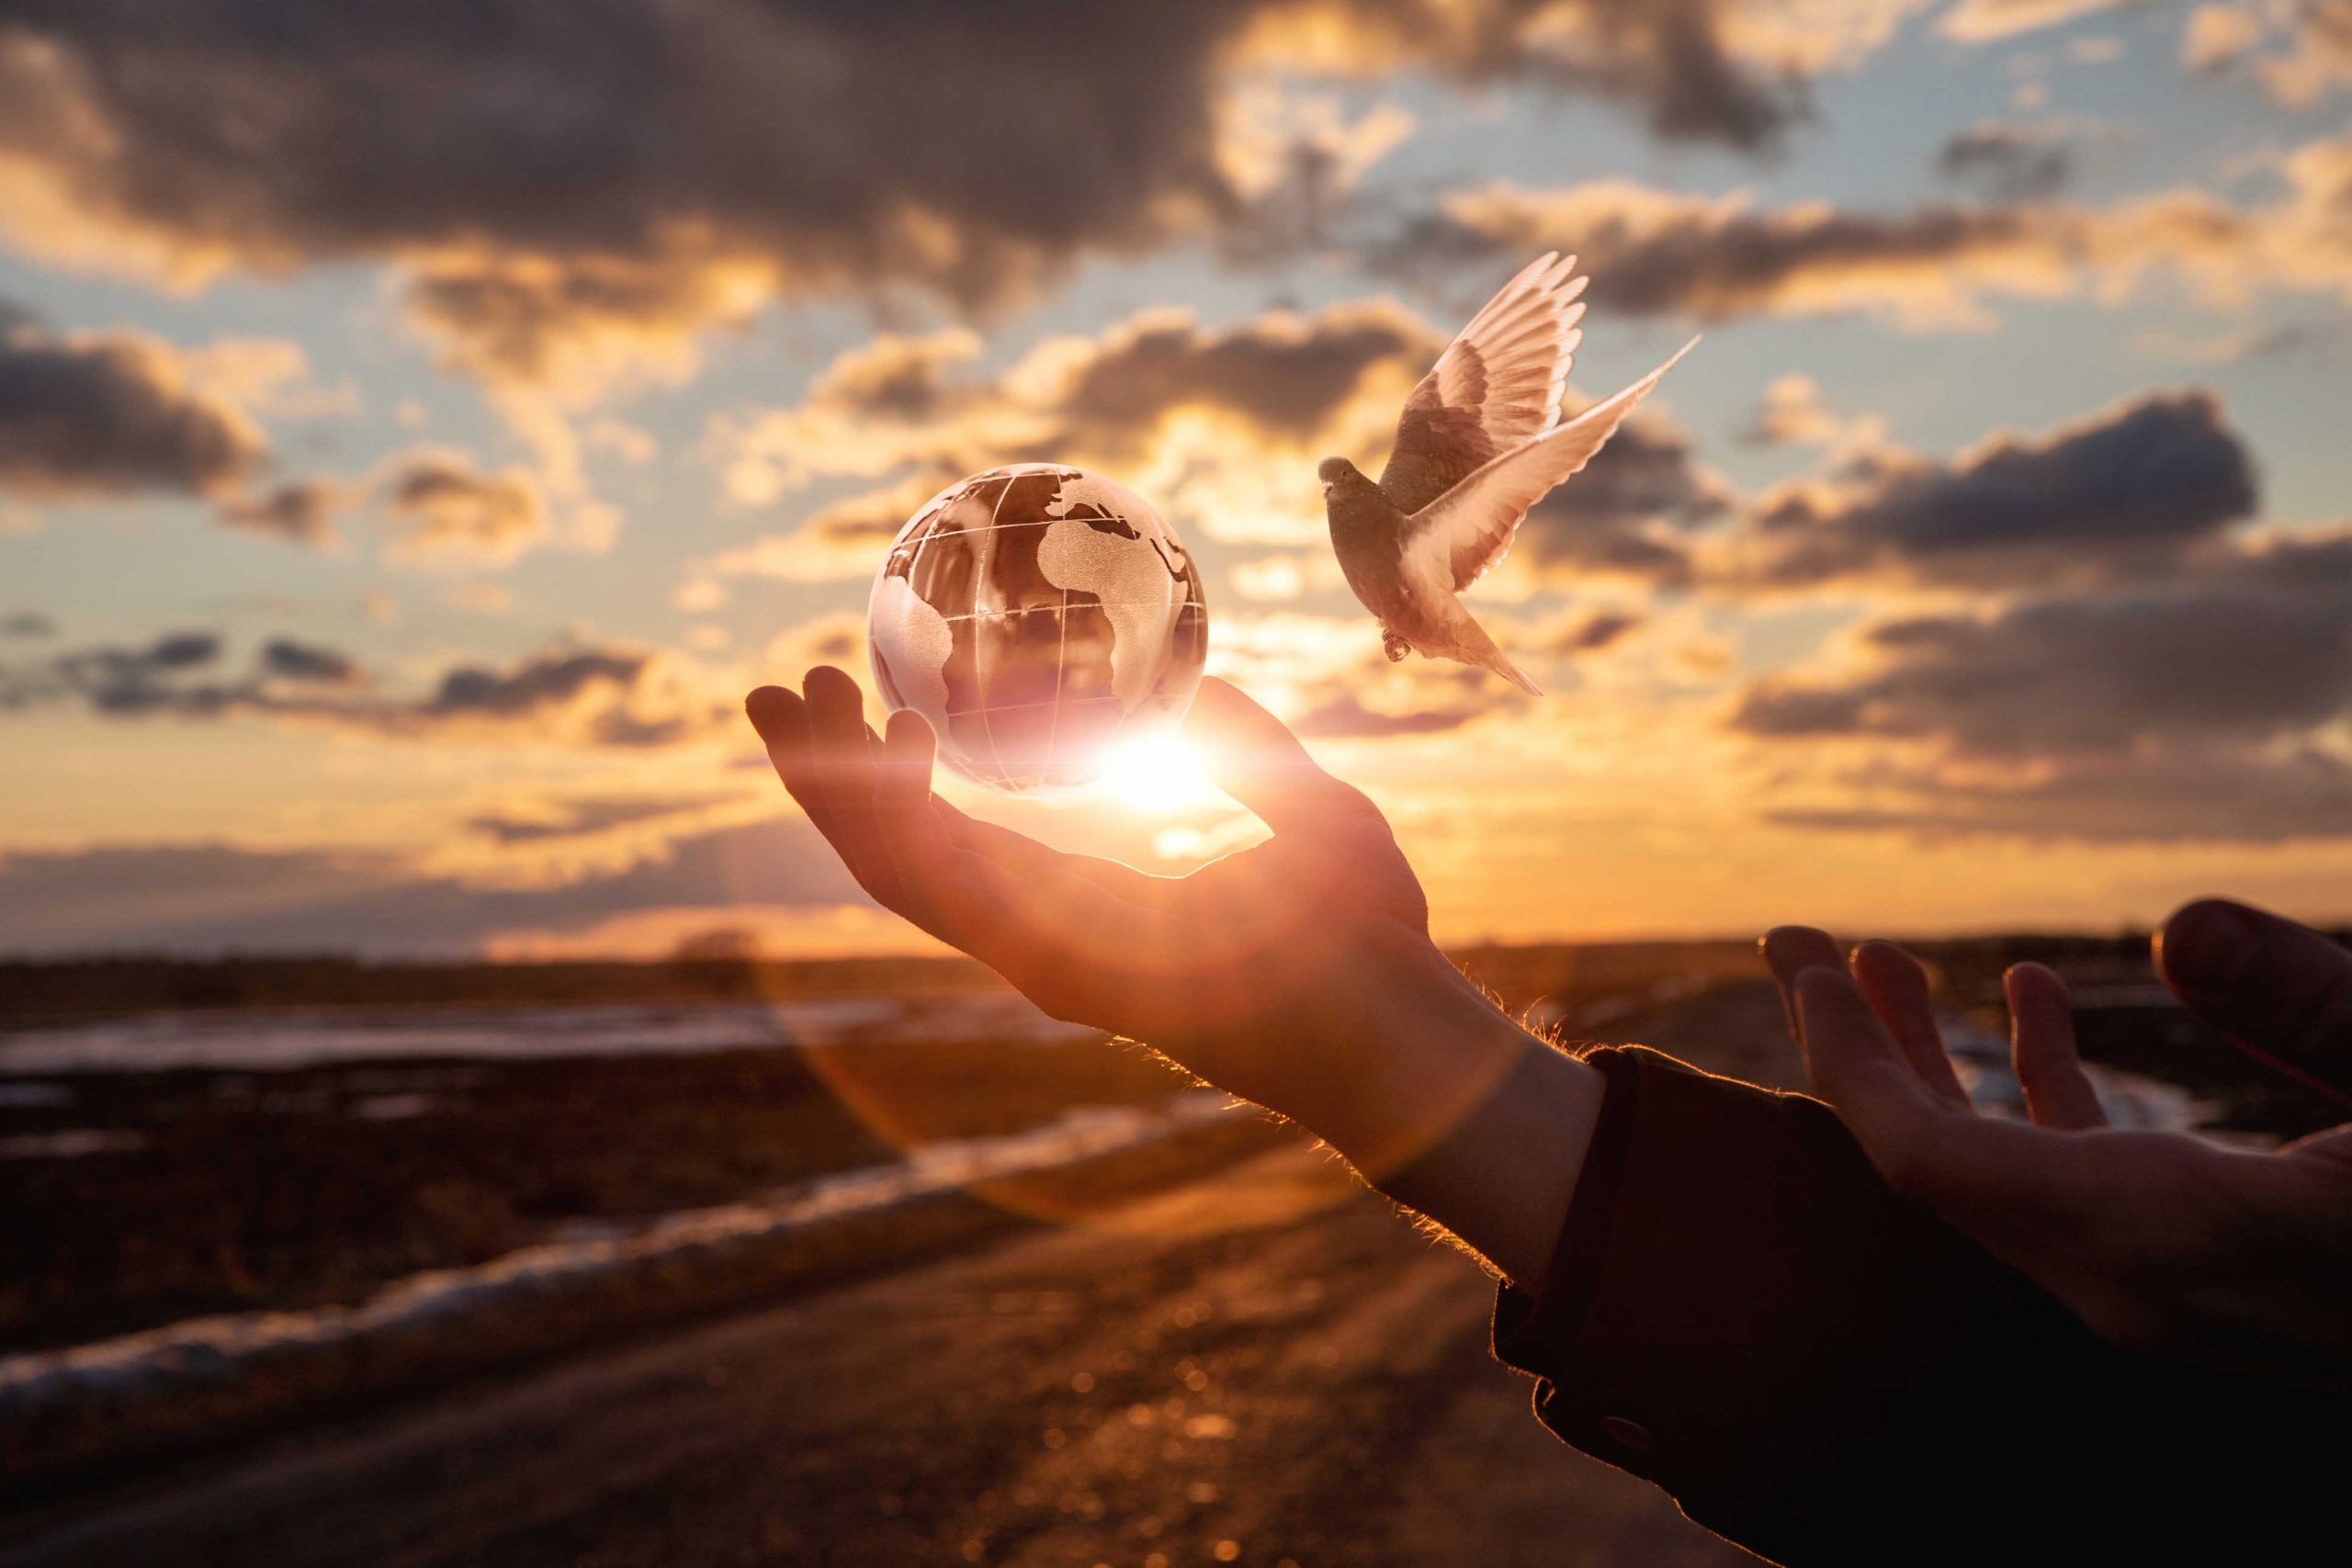 Sky in background with a hand holding a globe and dove flying near hand